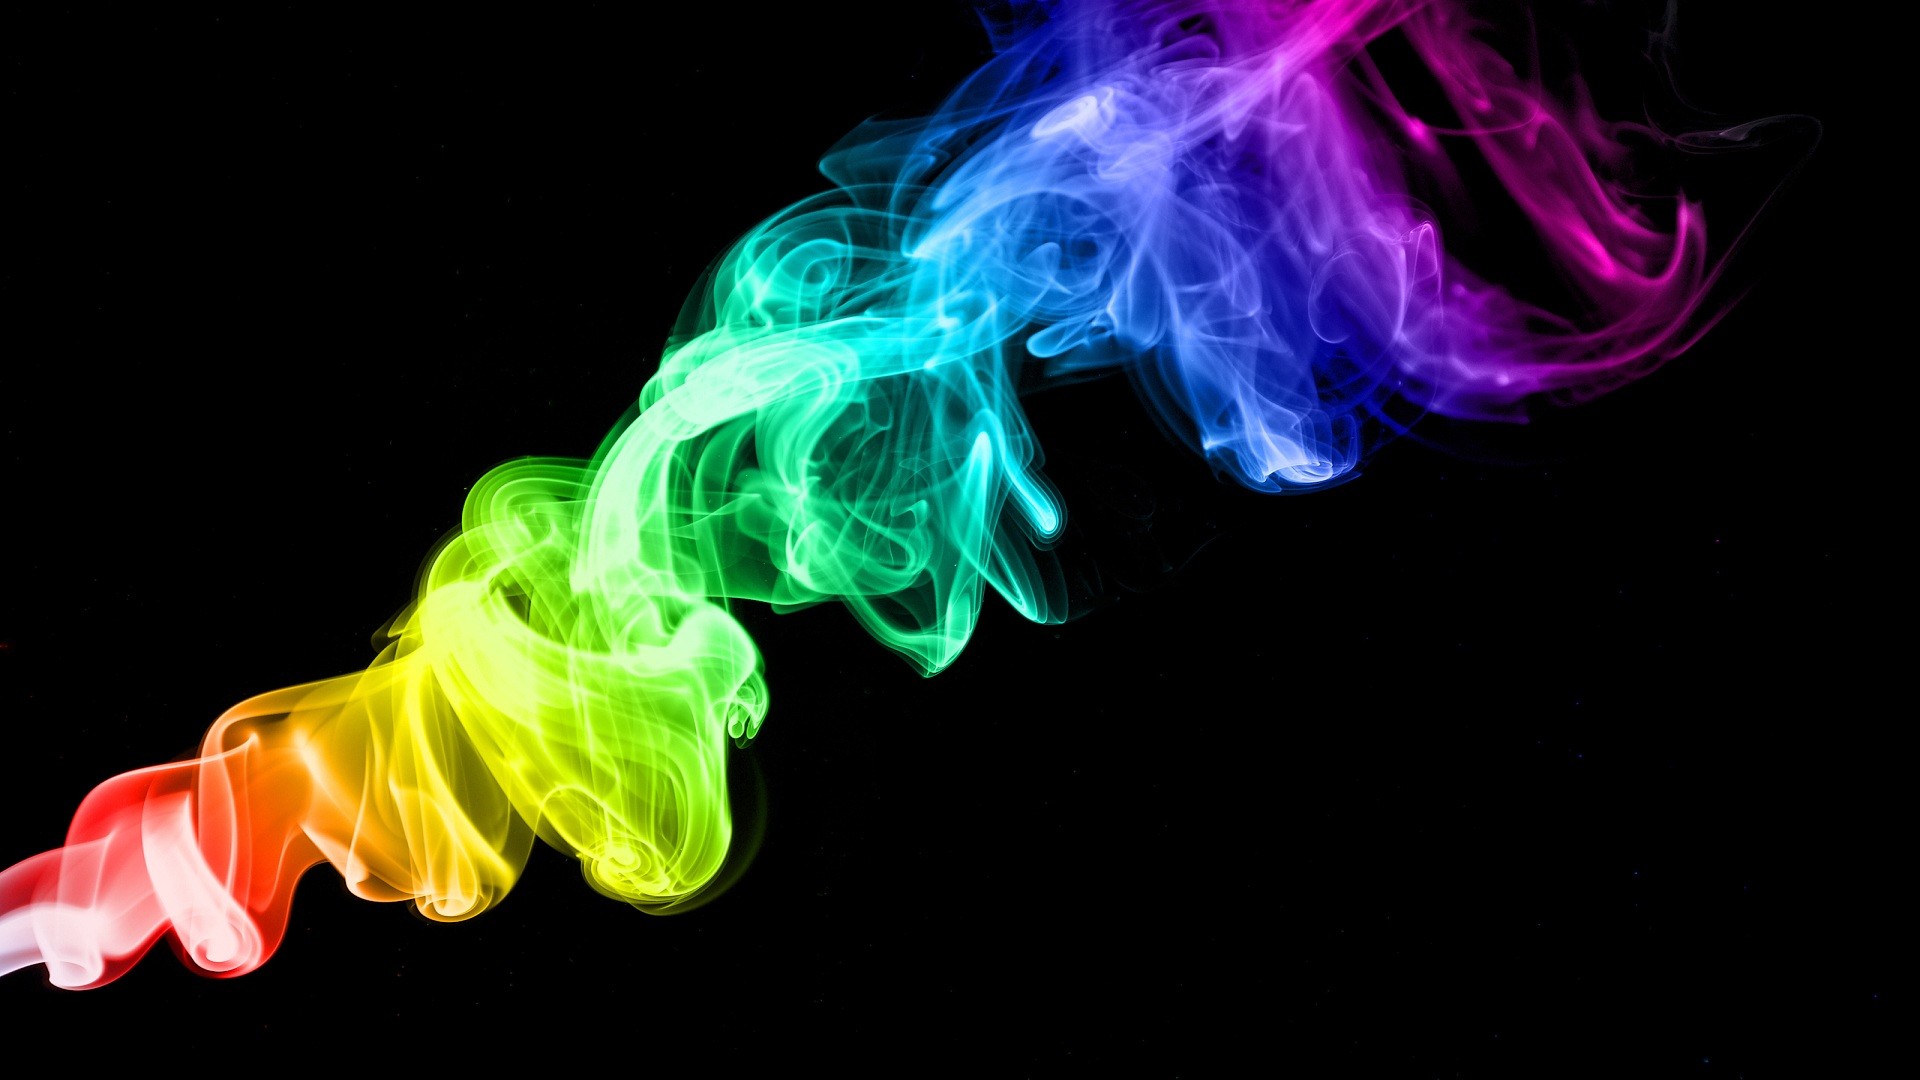 colorful, Smoke, Black Background, Abstract Wallpaper